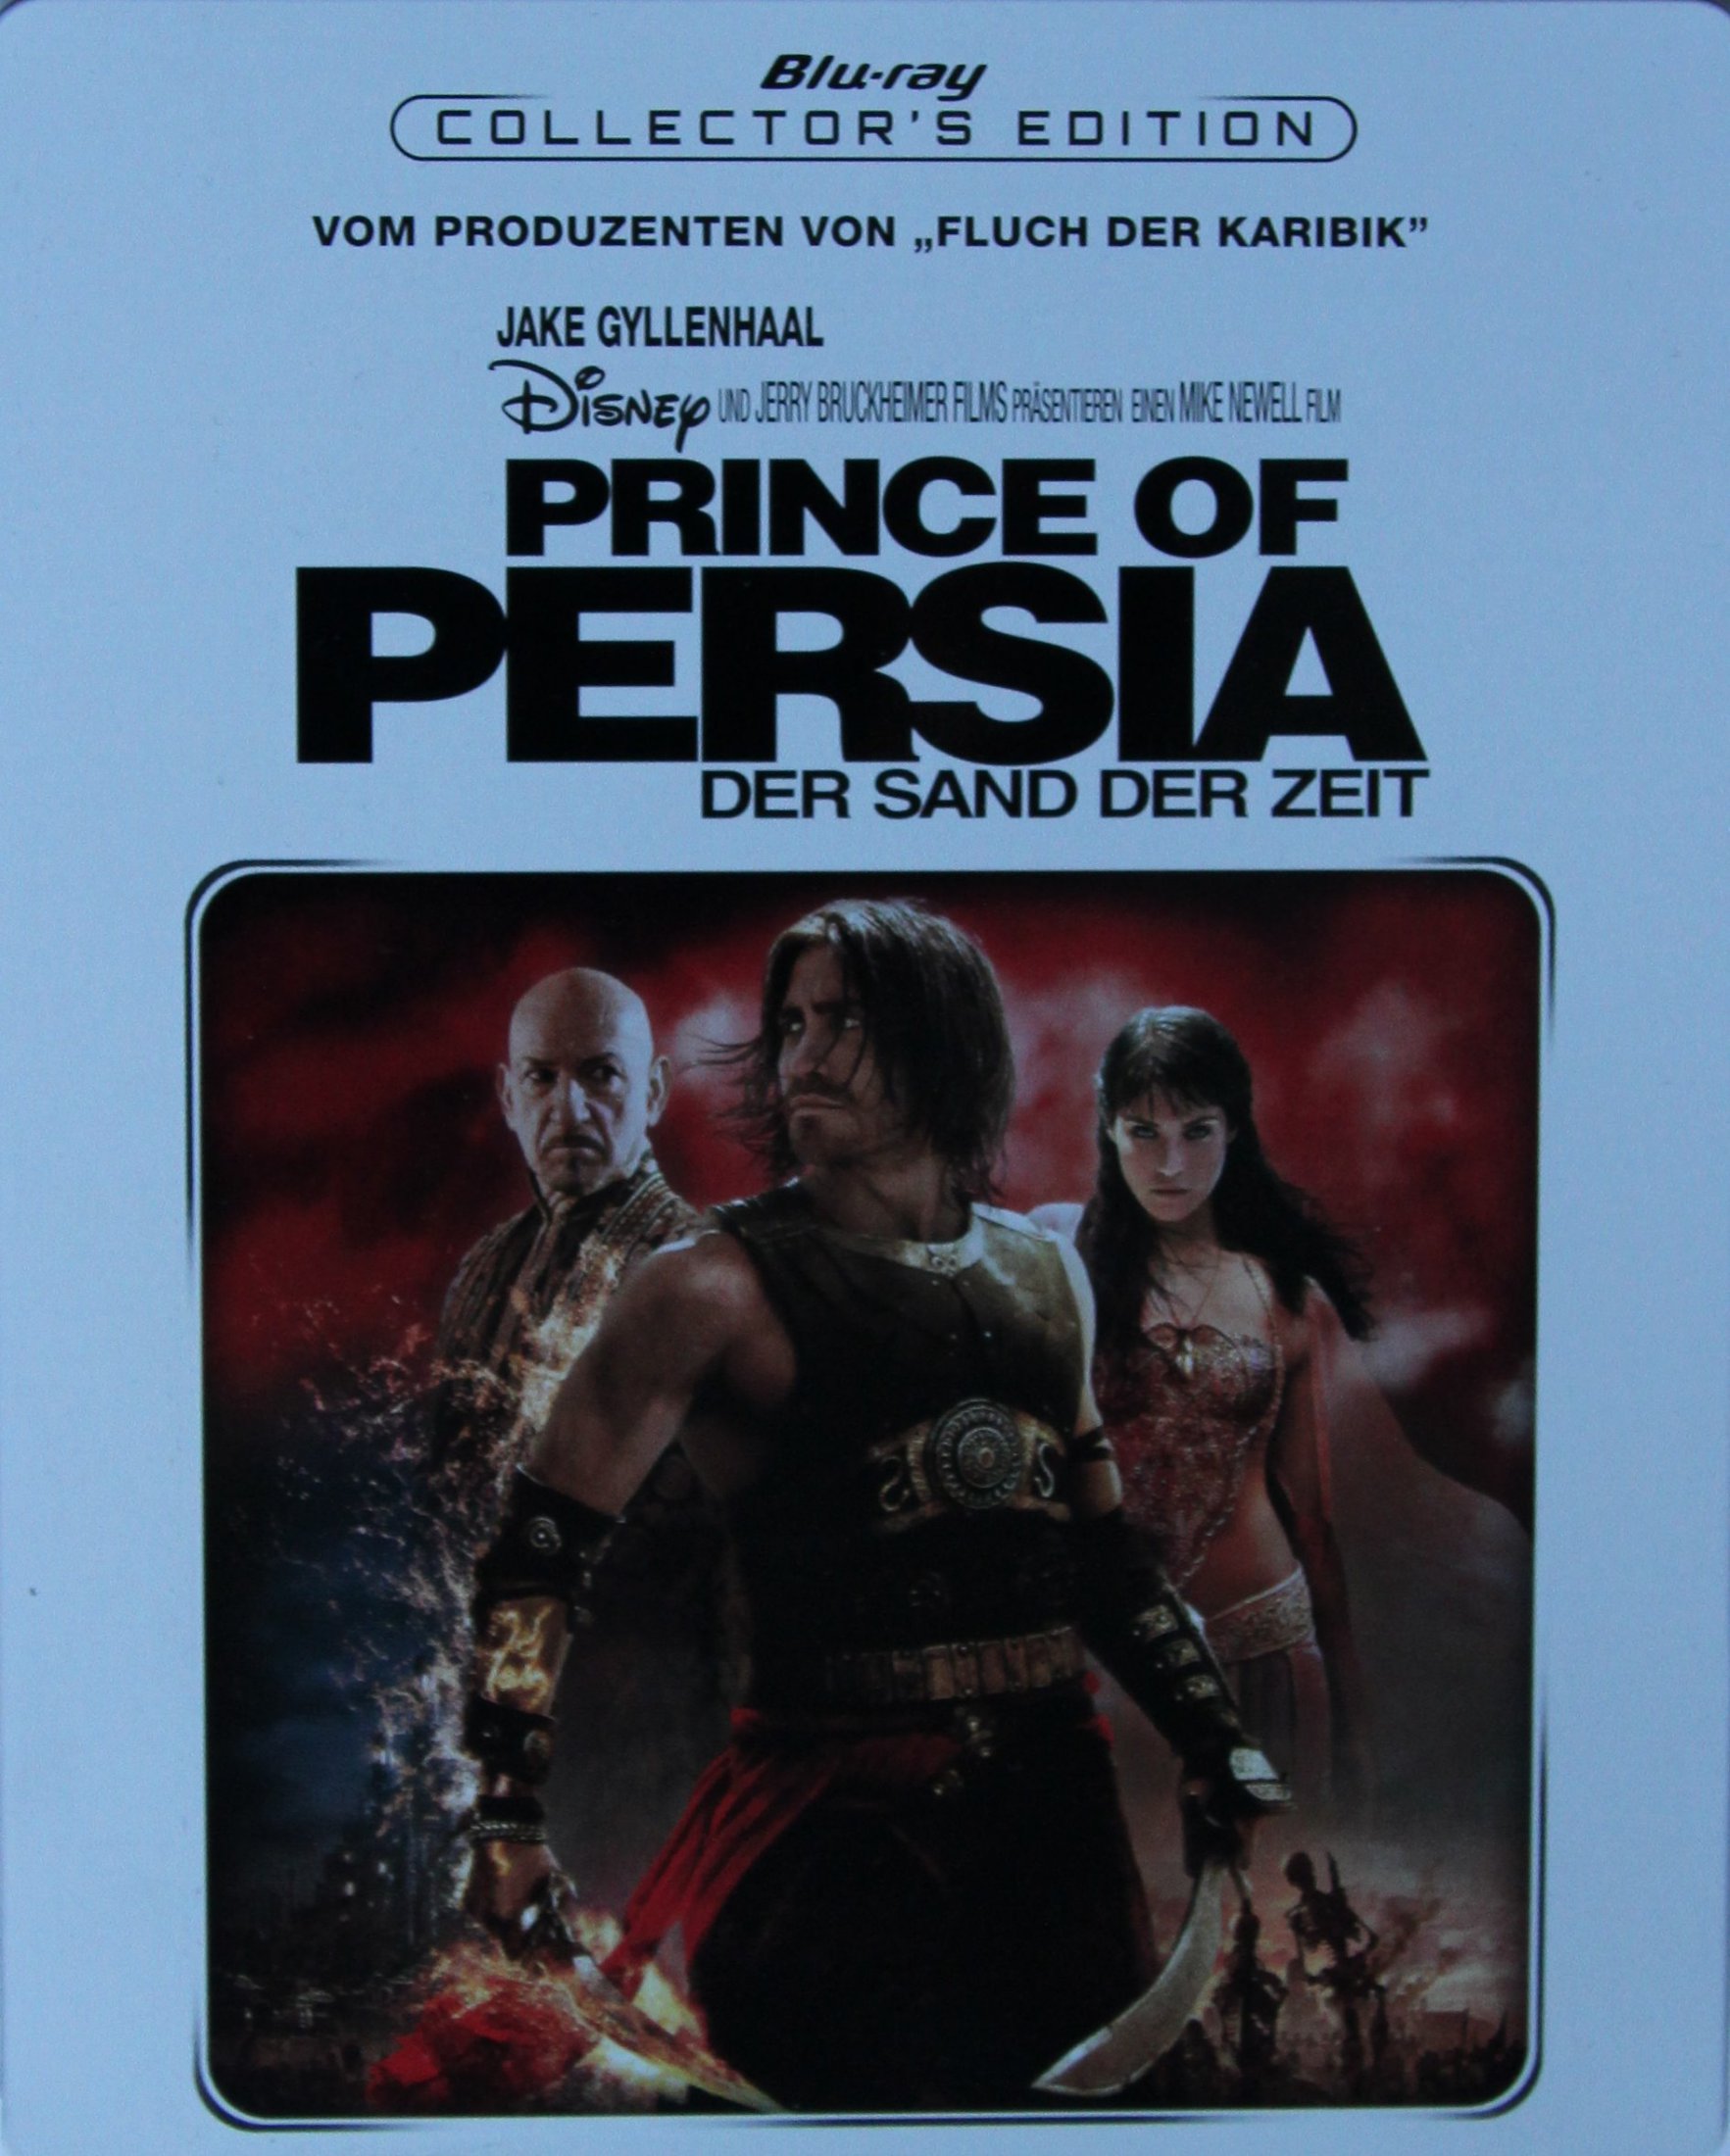 Prince of Persia Steelbook Front